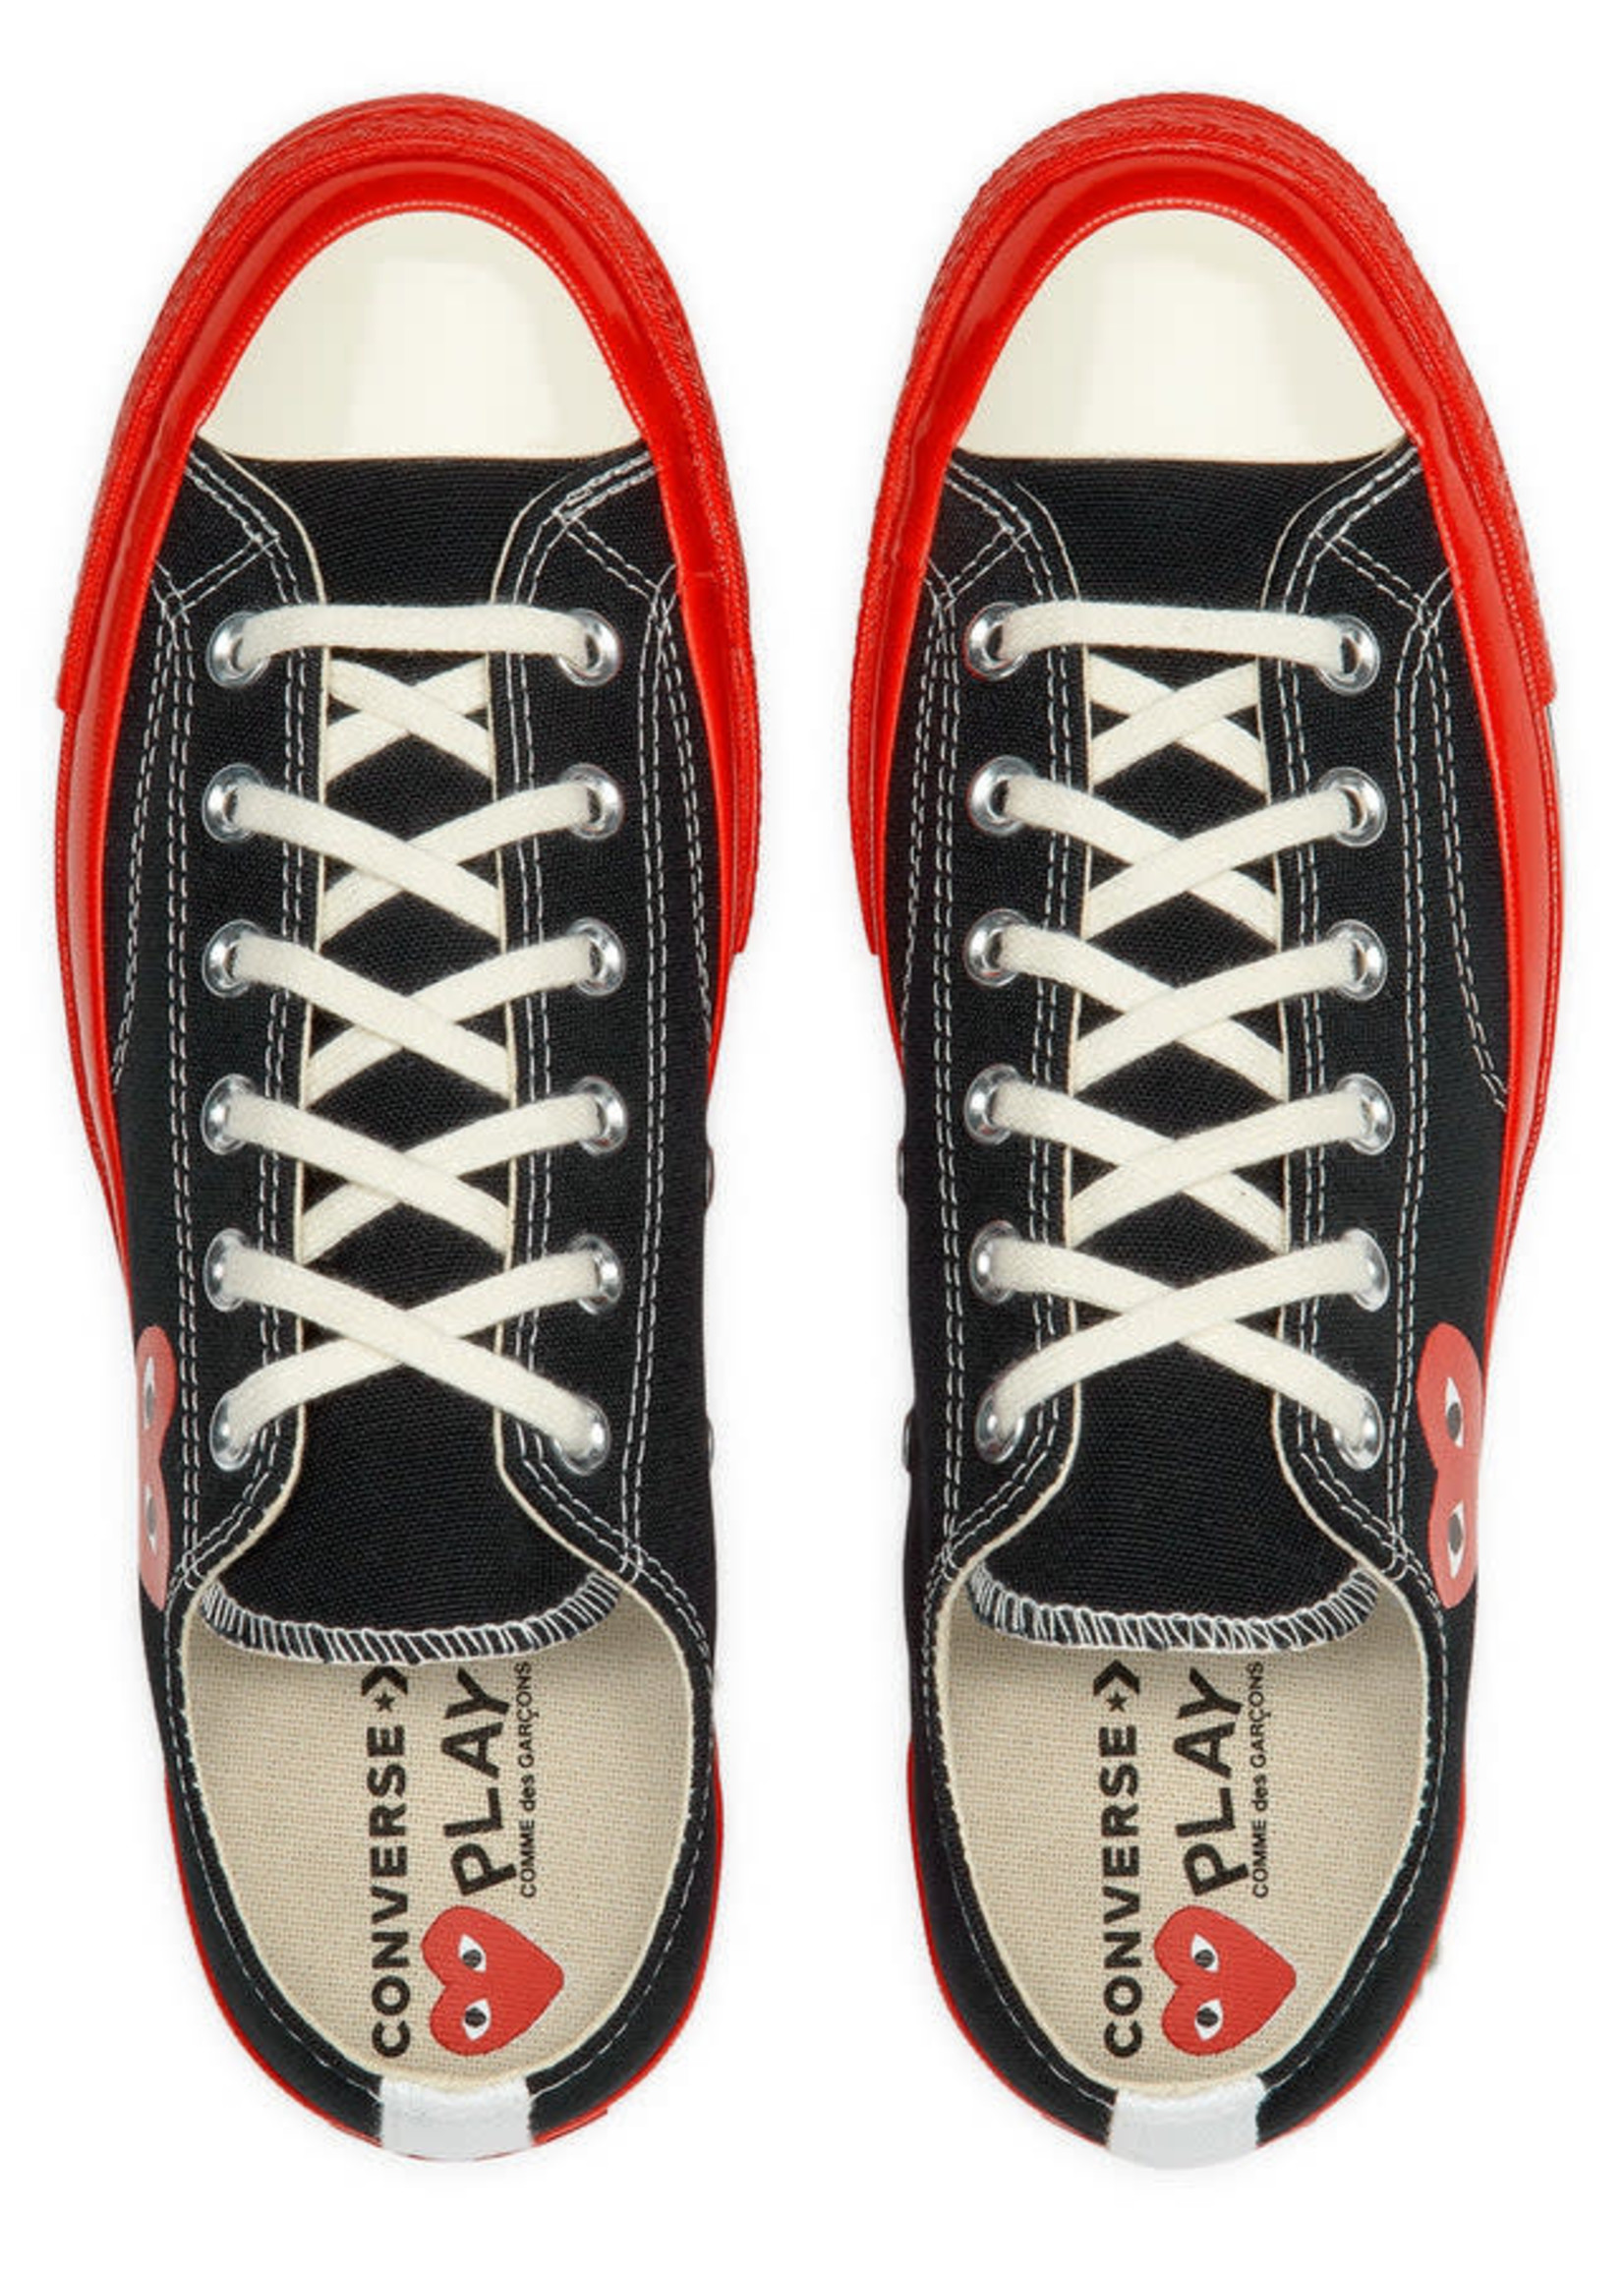 COMME DES GARÇONS PLAY X CONVERSE Black Low Tops with Red Soles